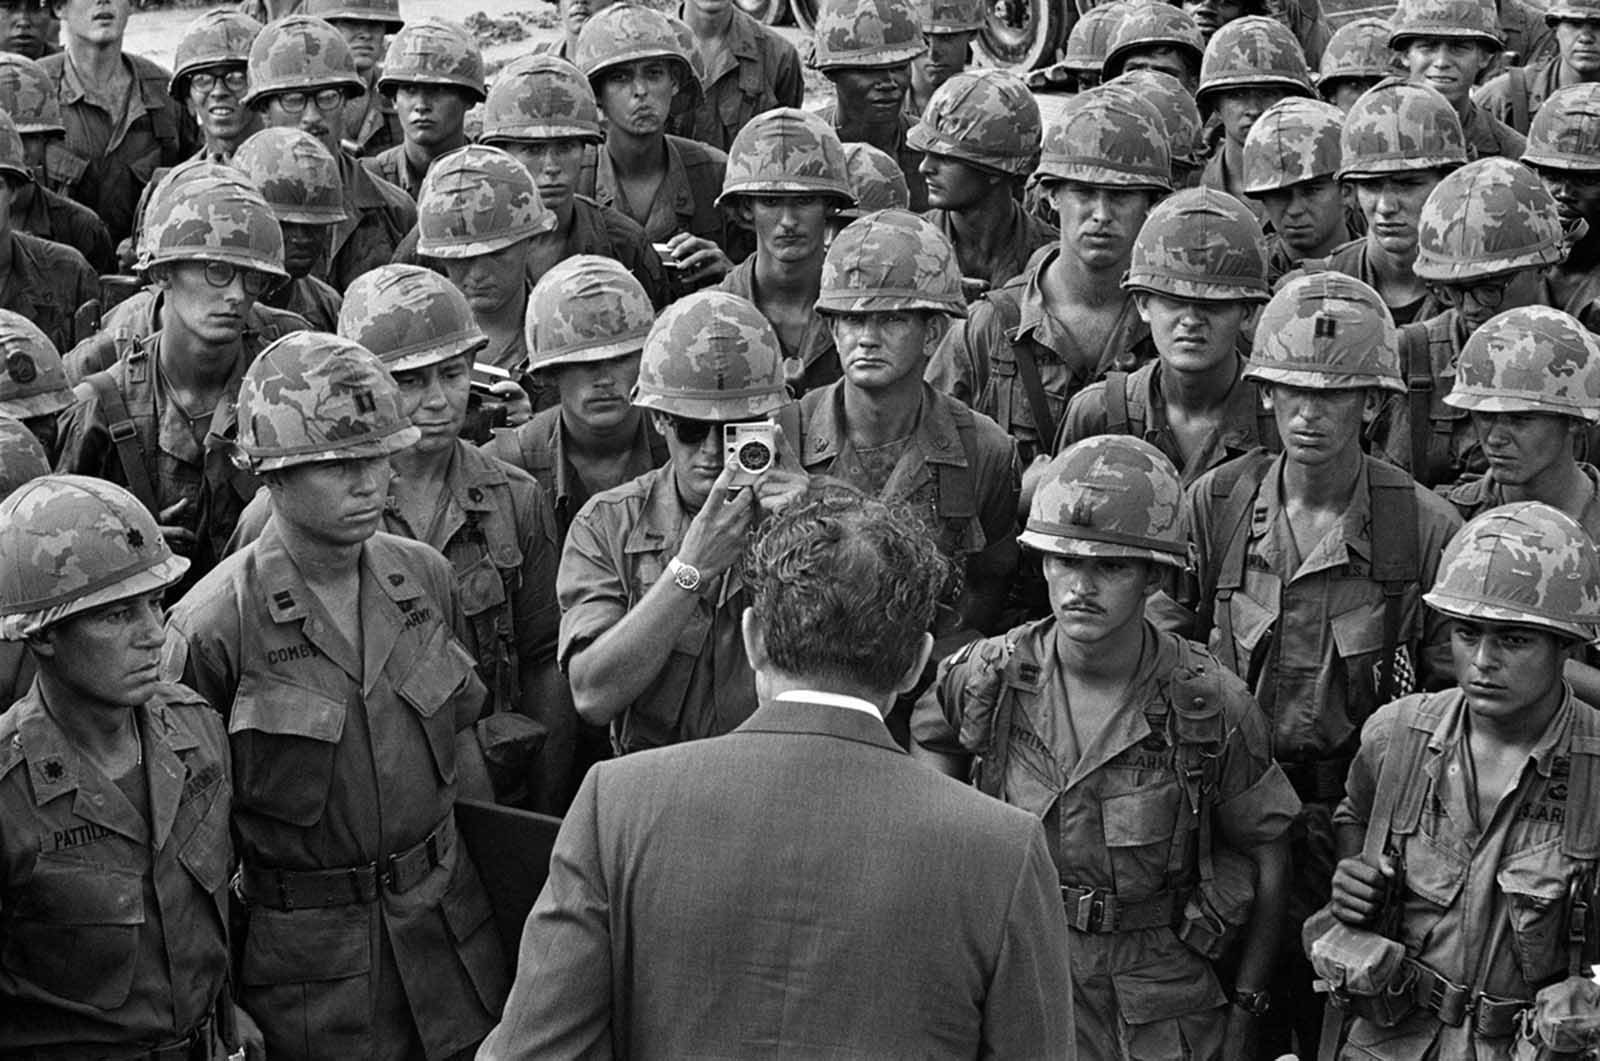 A GI gets a closeup photo as President Nixon meets with troops of the 1st Infantry Division at Di An, 12 miles northeast of Saigon, on his eighth visit to South Vietnam and his first as president, on July 30, 1969.